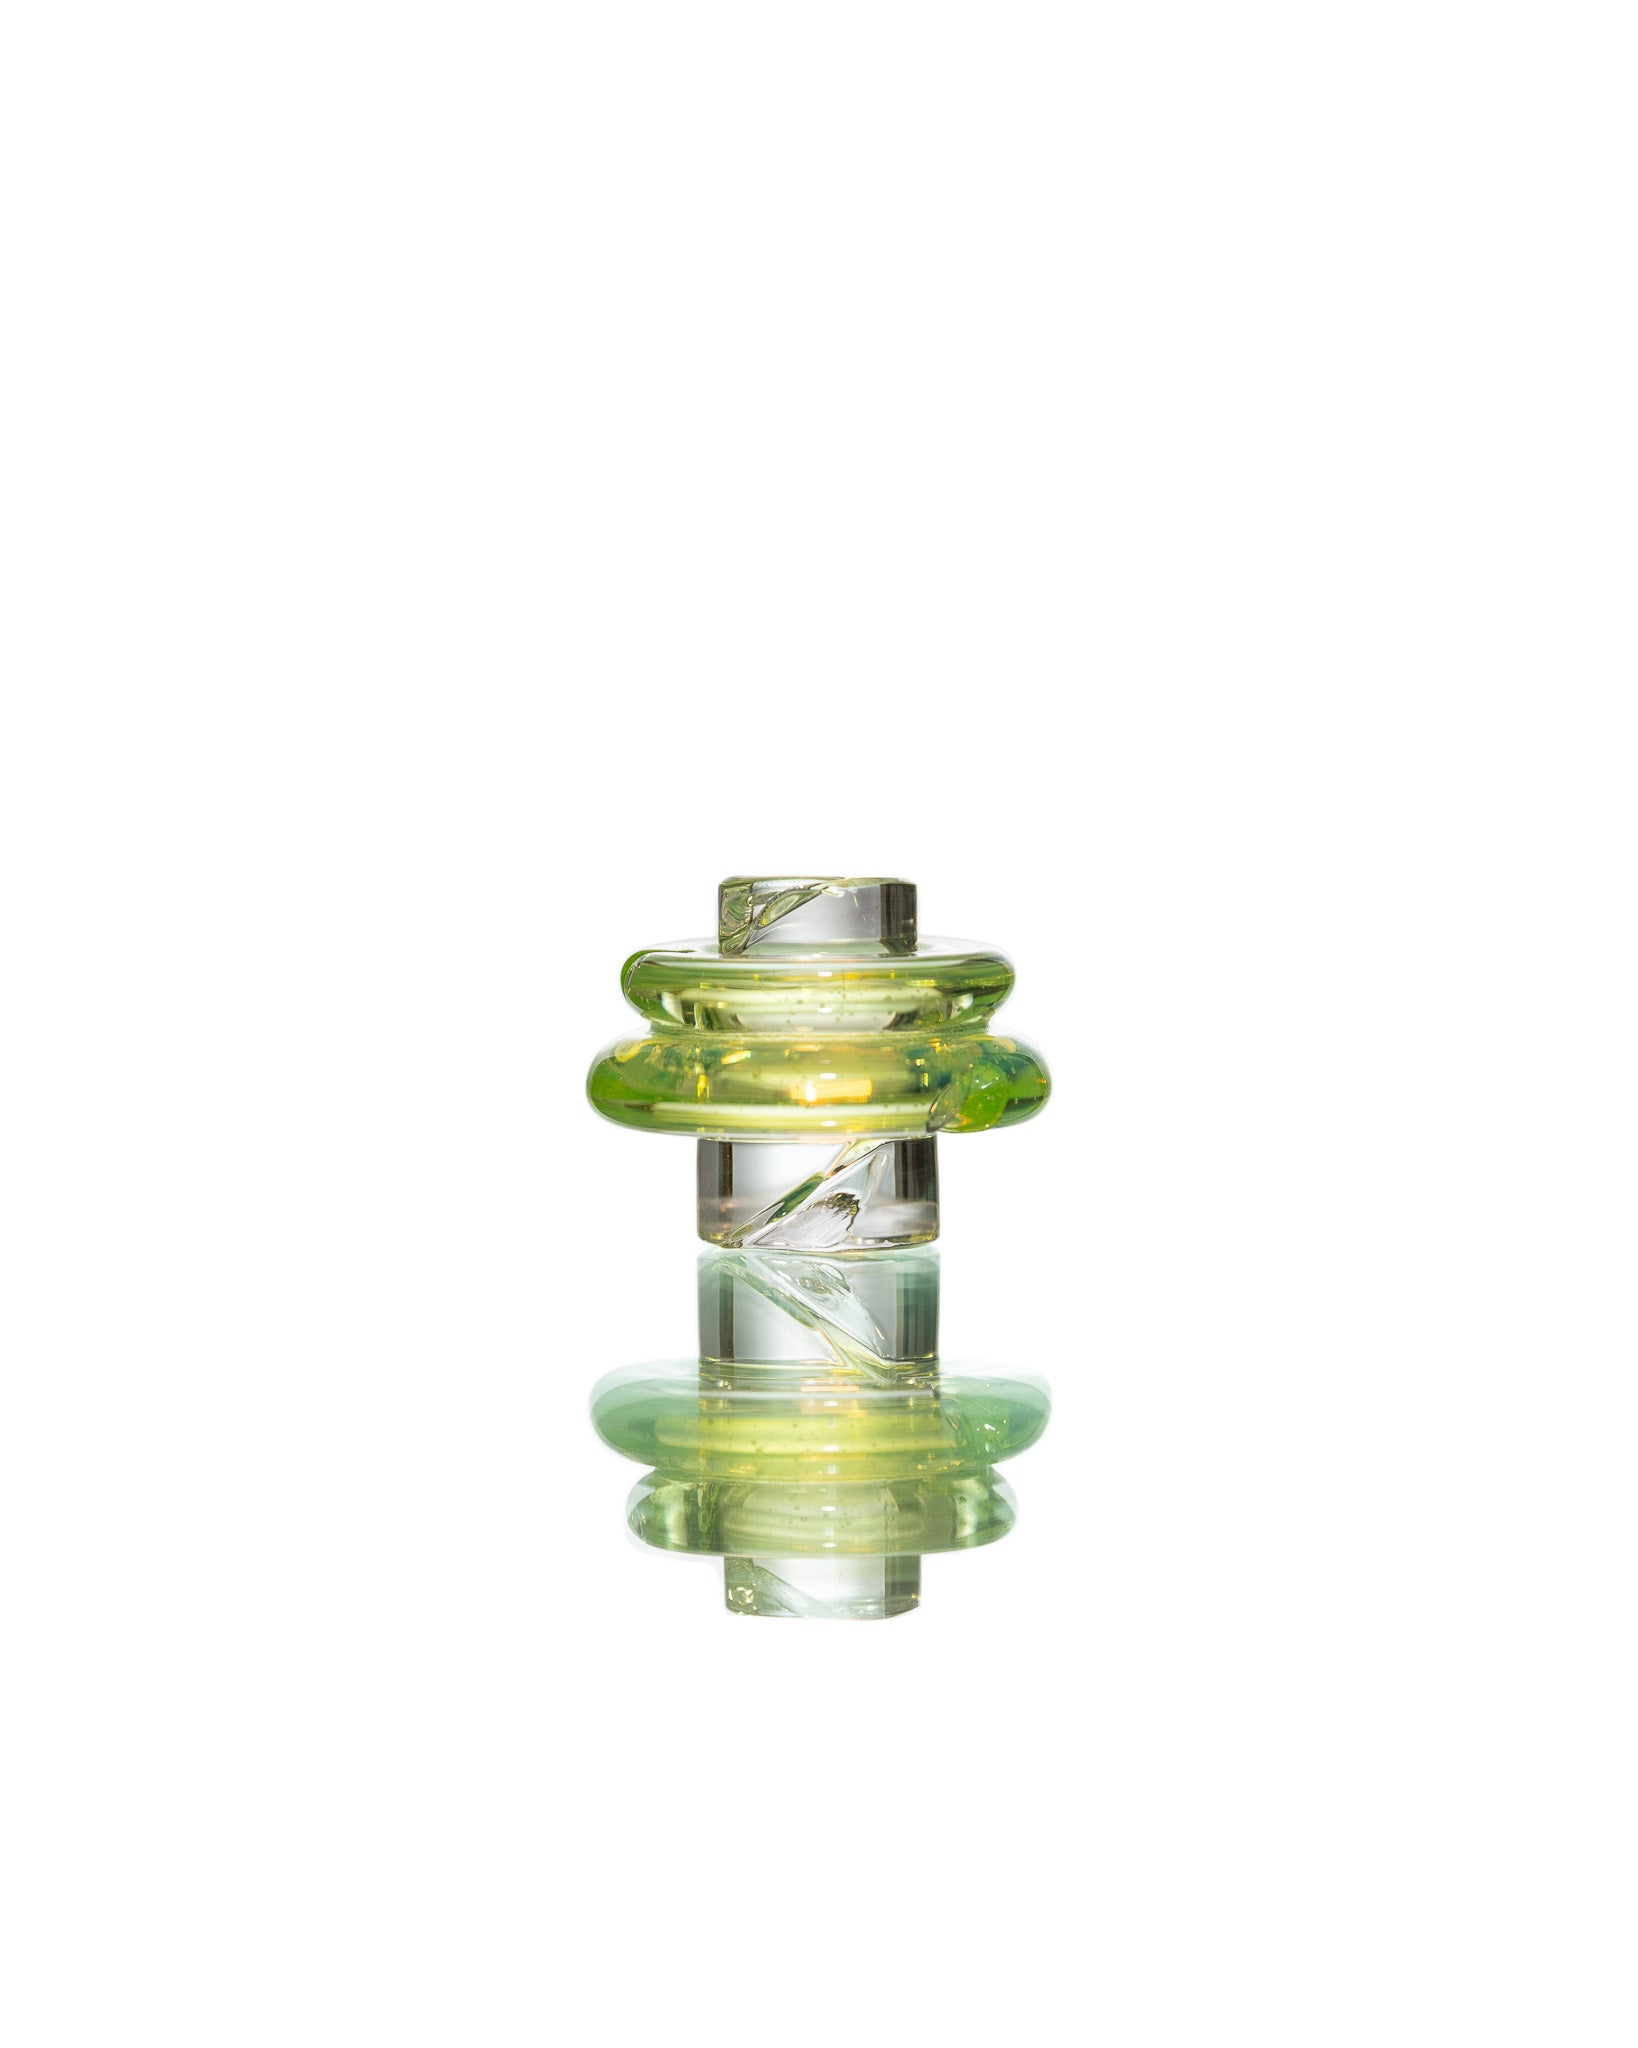 One Trick Pony - "Green Slyme" Multipass "Rockulus" Spinner Cap